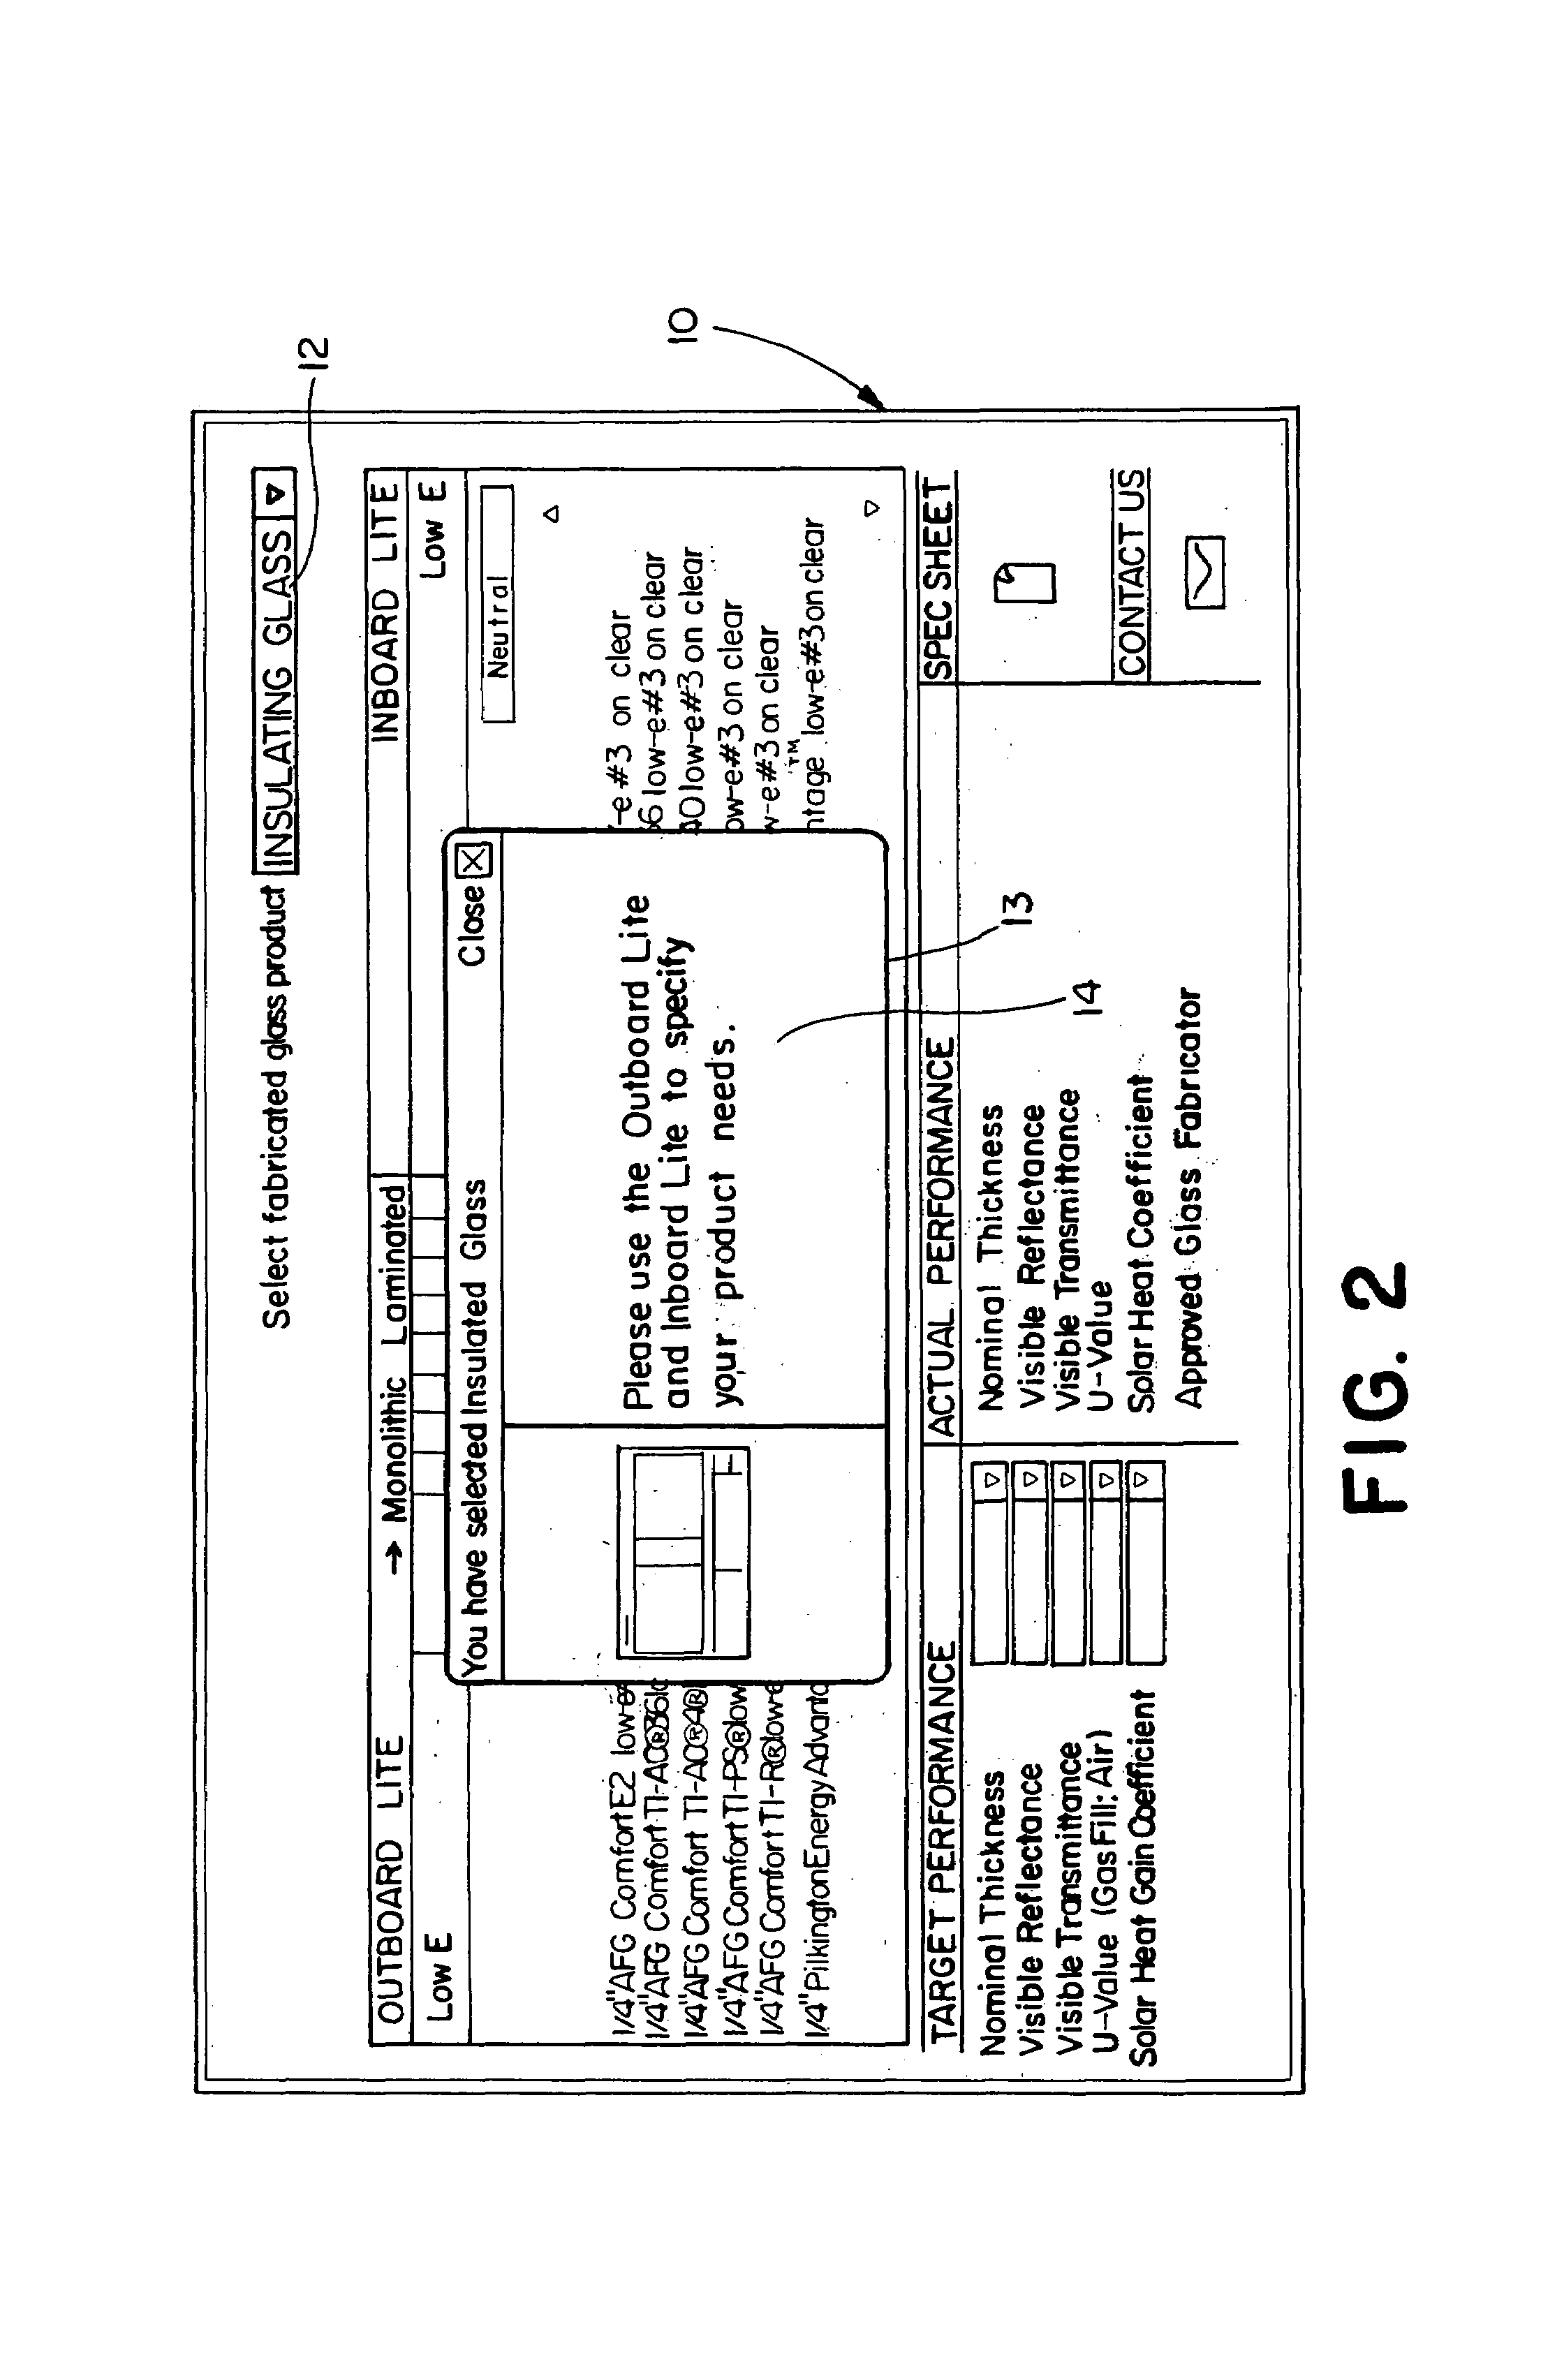 Method, apparatus and system for selecting, ordering and purchasing glass products